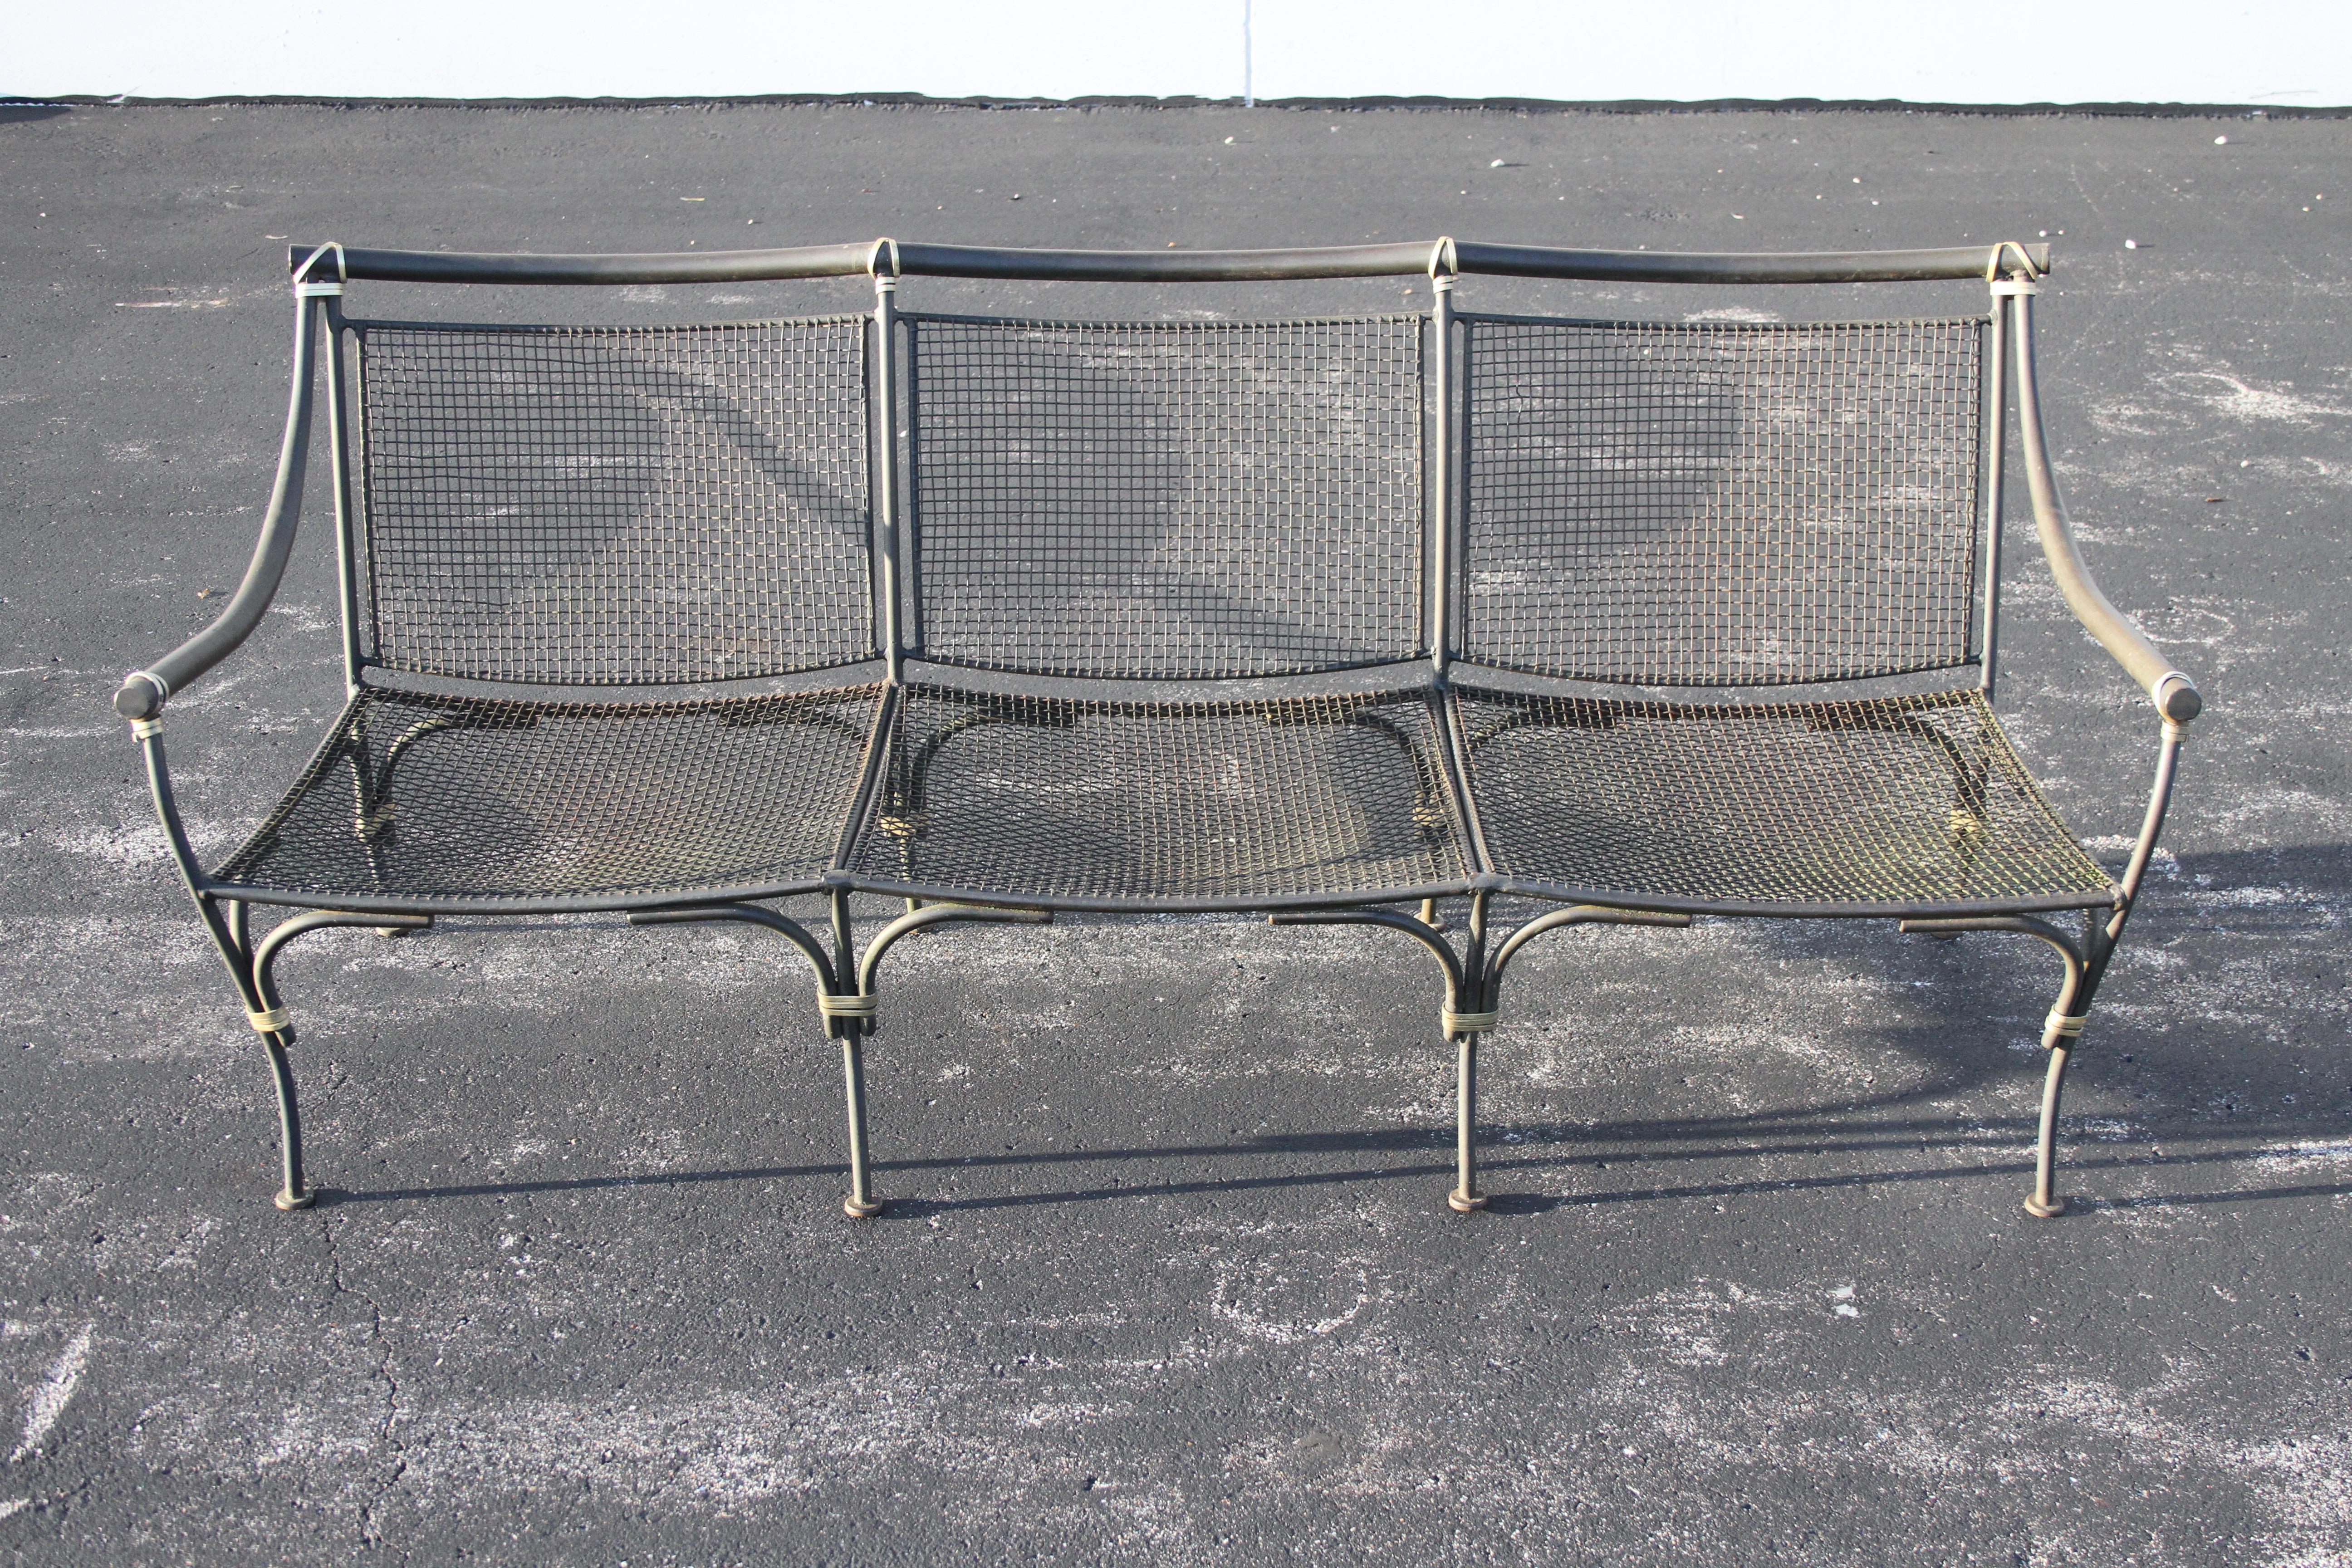  Salerini Style Wrought Iron & Mesh Outdoor 3 Seat Sofa & Glass Coffee Table Set In Good Condition For Sale In St. Louis, MO